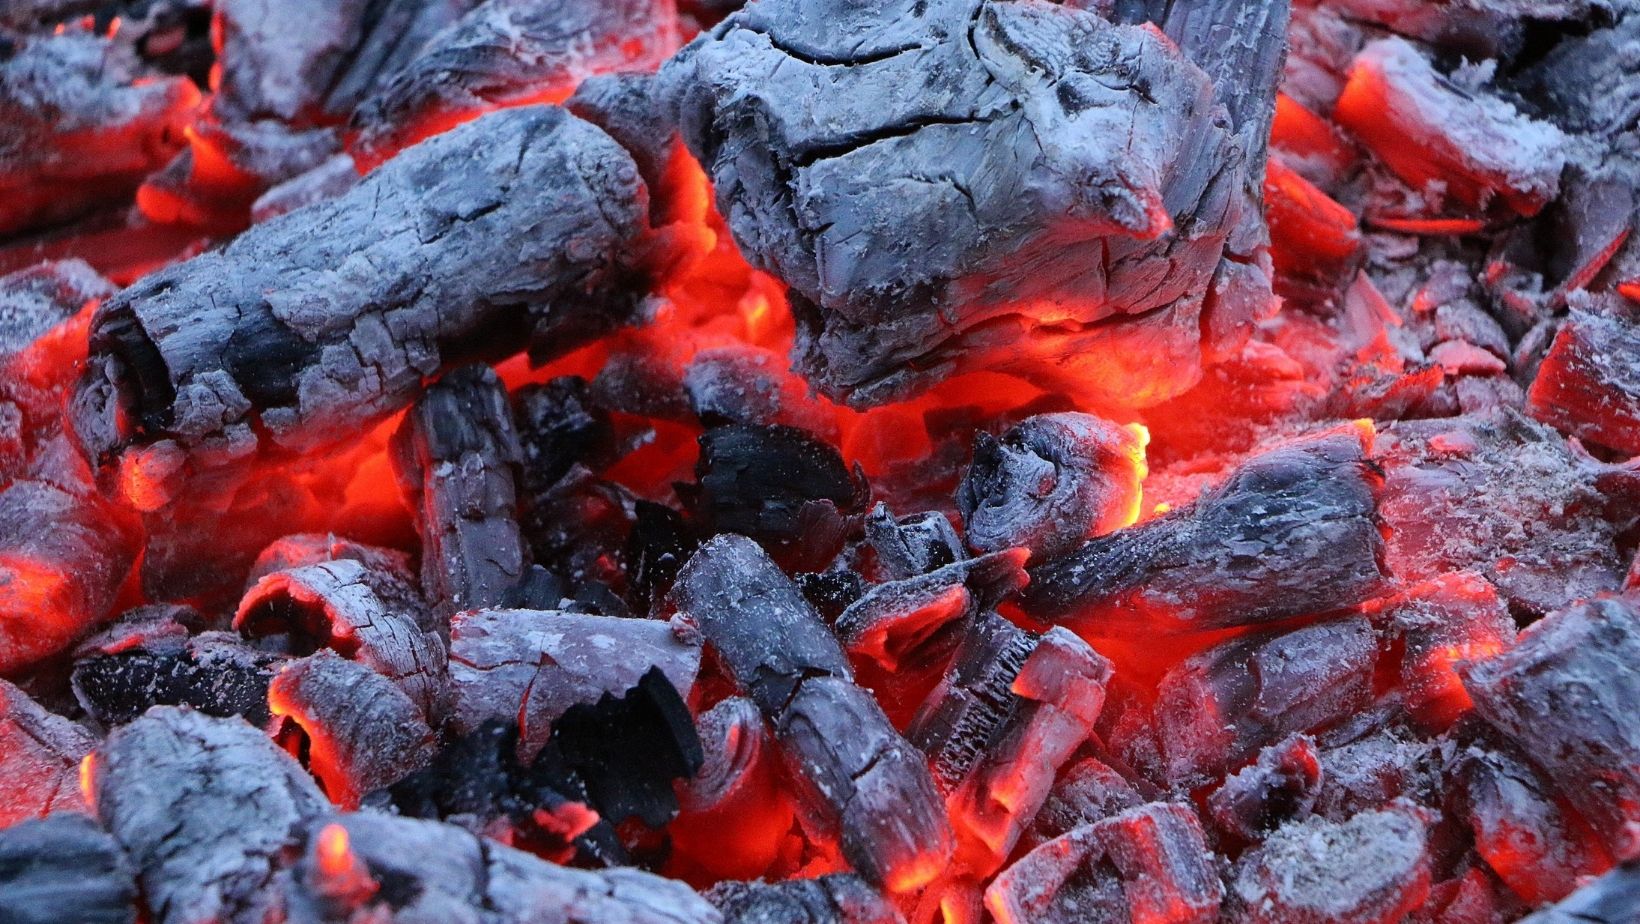 Burning charcoal is a source of carbon monoxide in RVs.